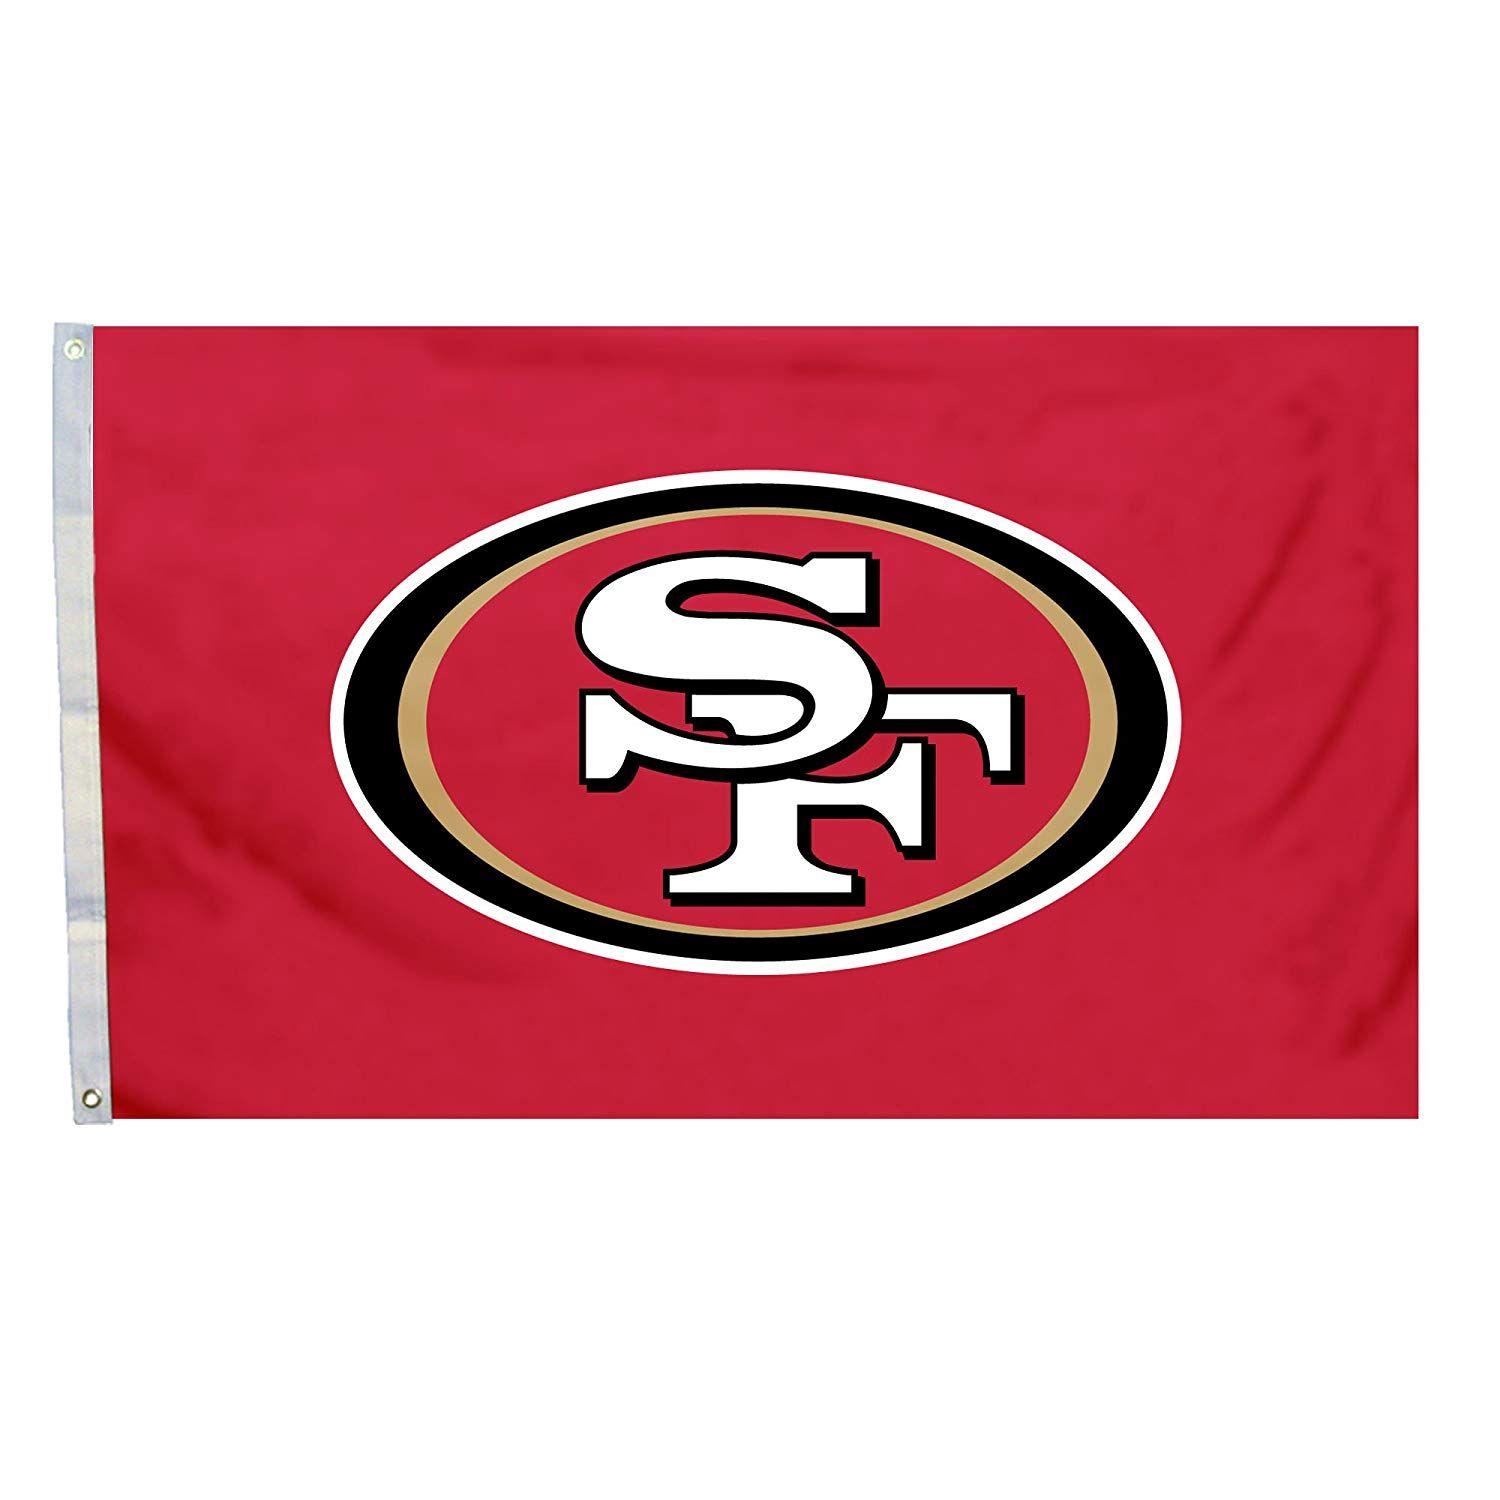 NFL 49ers Logo - Amazon.com : NFL San Francisco 49ers Logo Only 3-by-5 Feet Flag with ...